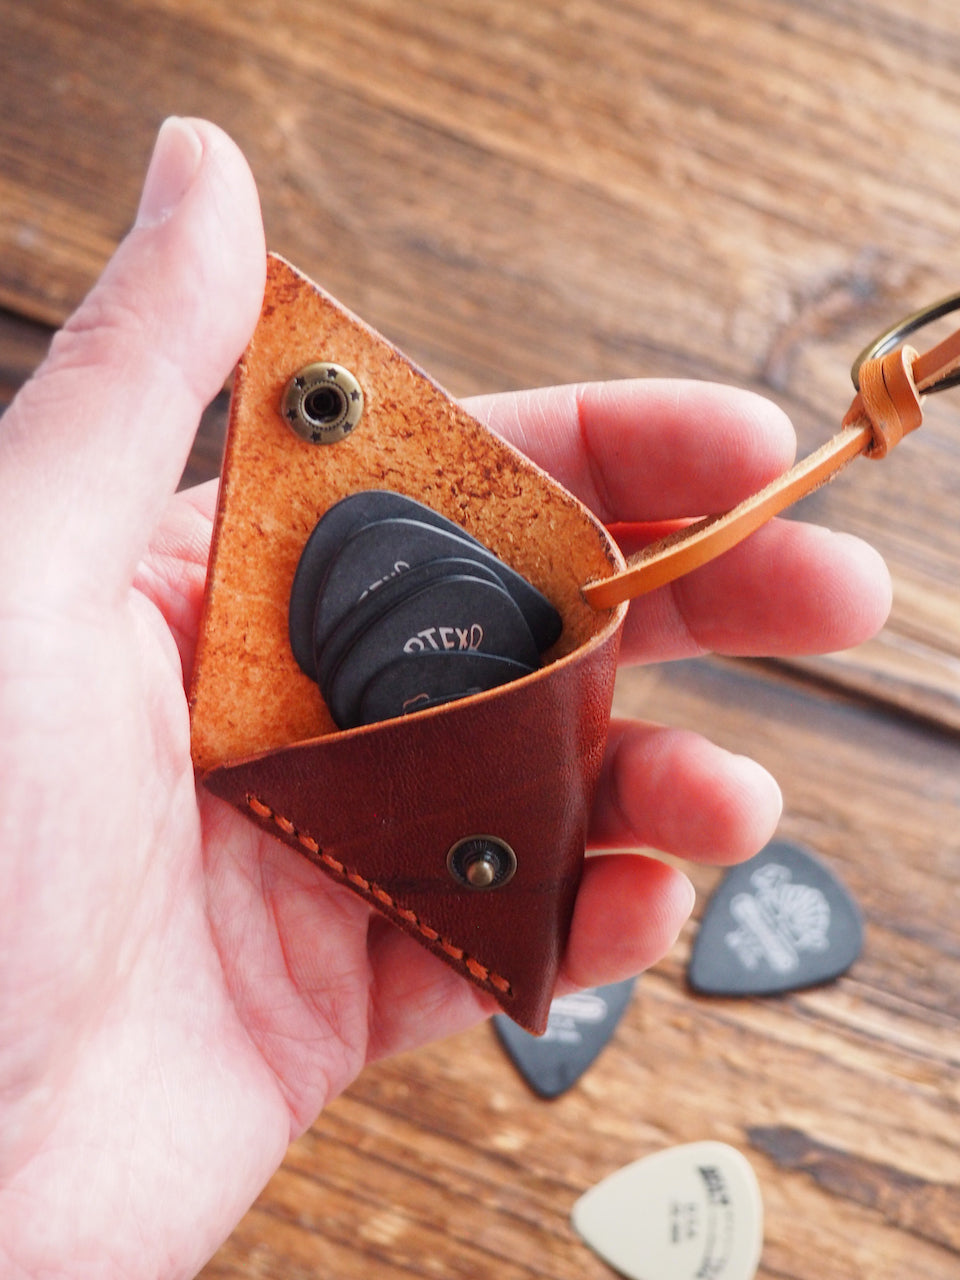 Personalized Leather Folded Guitar Pick Holder Keychain #Whiskey Brown | Handmade Leather Goods | Personalized Gifts | ES Corner